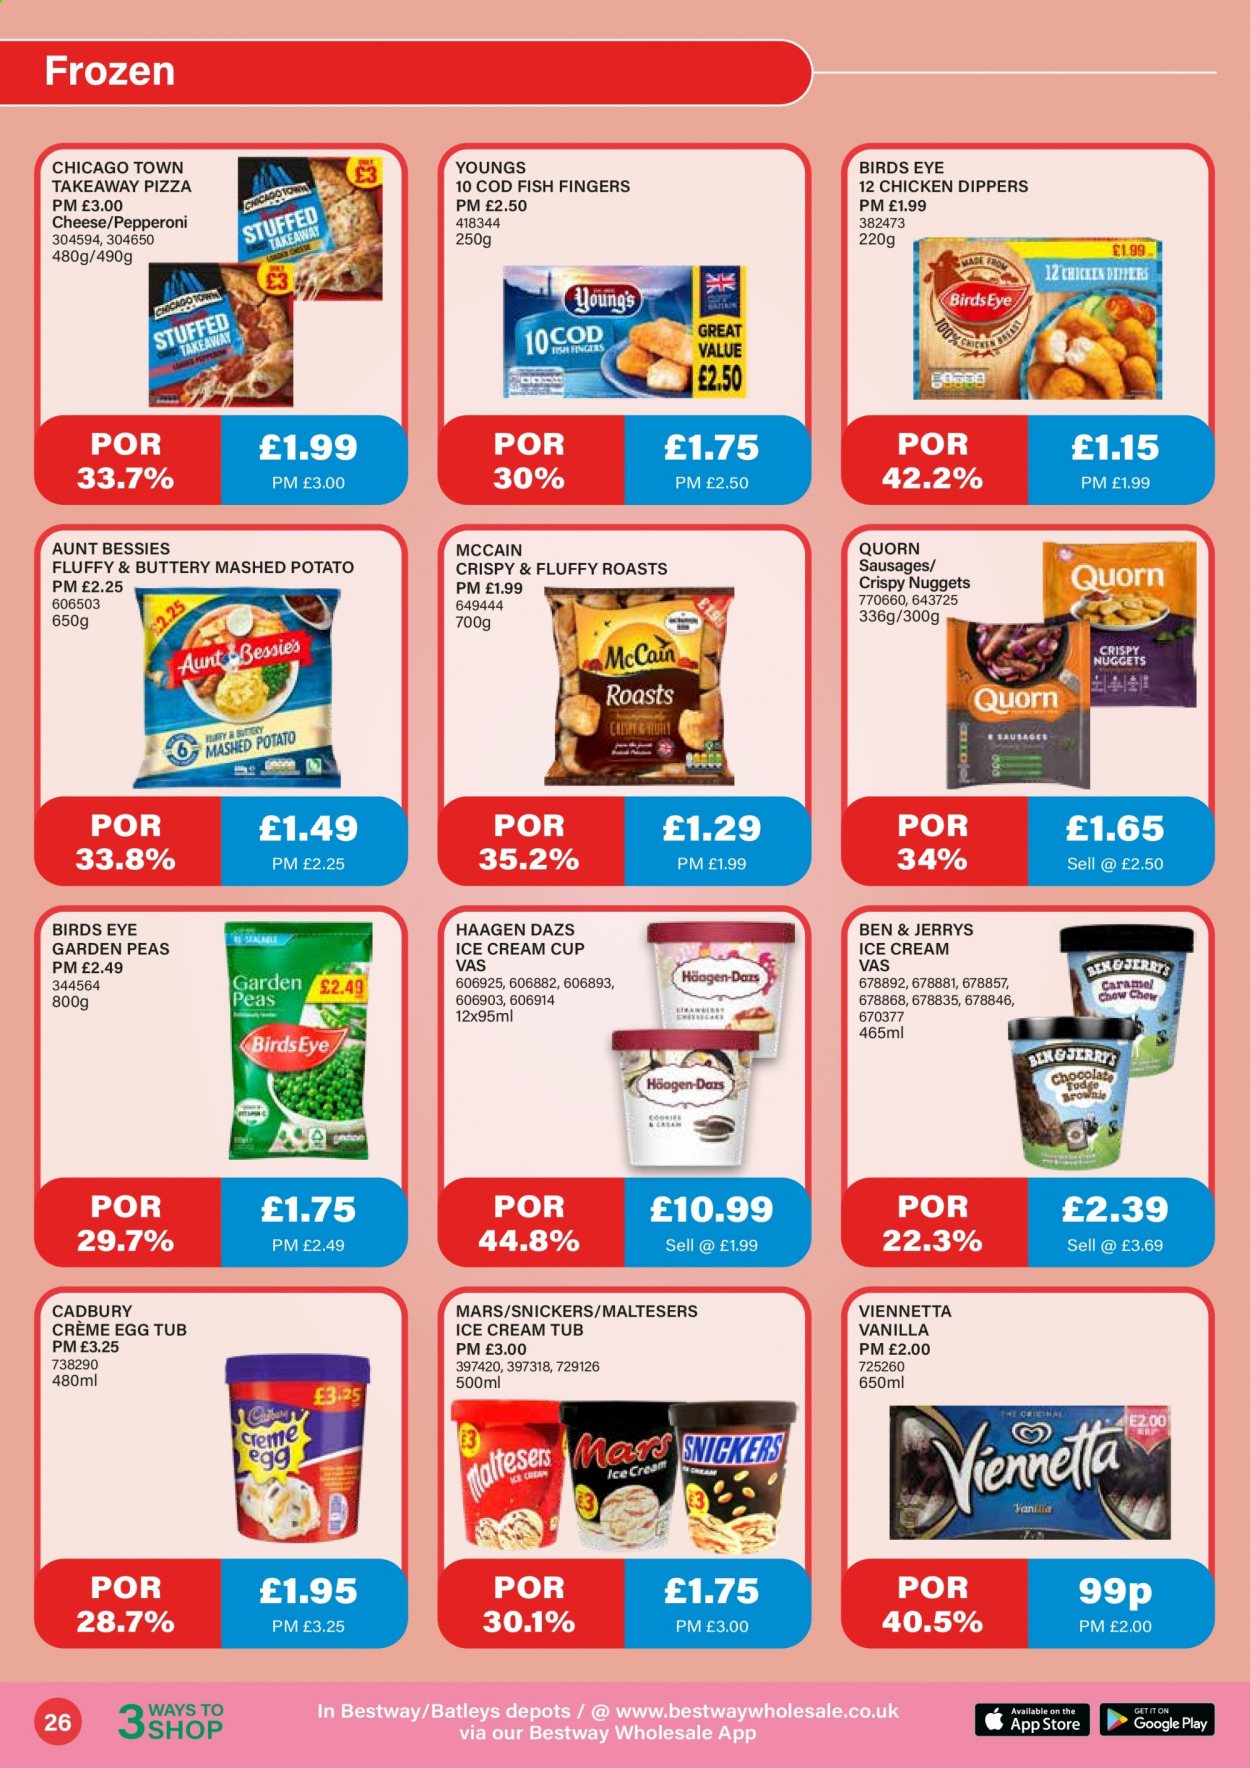 thumbnail - Bestway offer  - 26/02/2021 - 25/03/2021 - Sales products - peas, nuggets, chicken dippers, chicken, brownies, cod, fish fingers, fish, pizza, Bird's Eye, sausage, pepperoni, cheese, ice cream, Häagen-Dazs, Ben & Jerry's, McCain, Snickers, Mars, Cadbury, Maltesers, caramel, cup. Page 26.